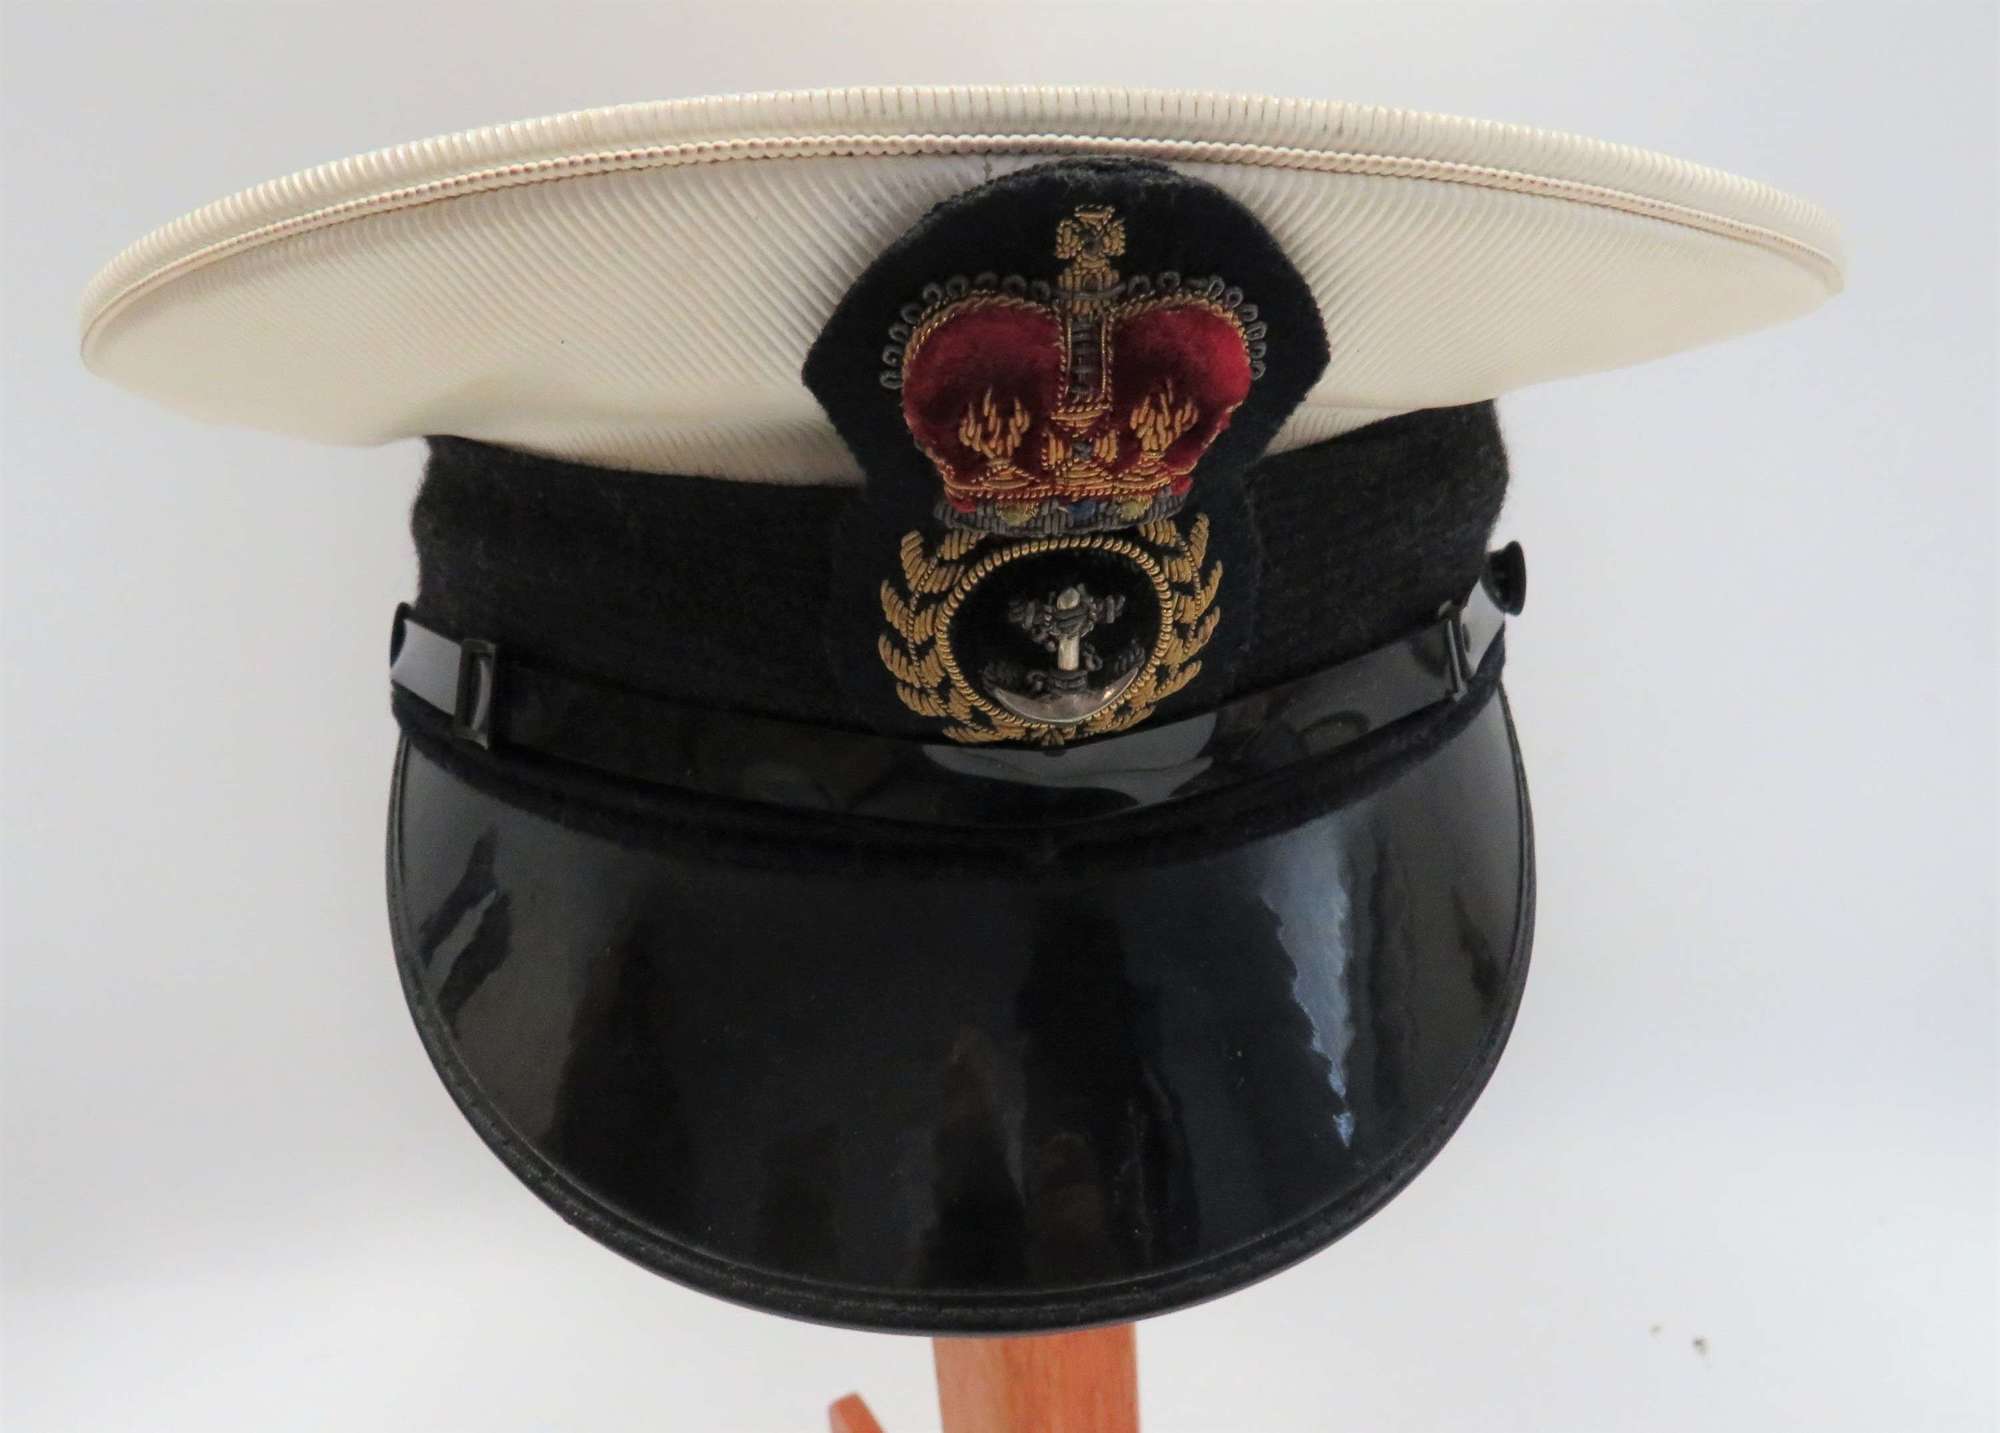 Post 1953 Royal Navy Chief Petty Officers Cap